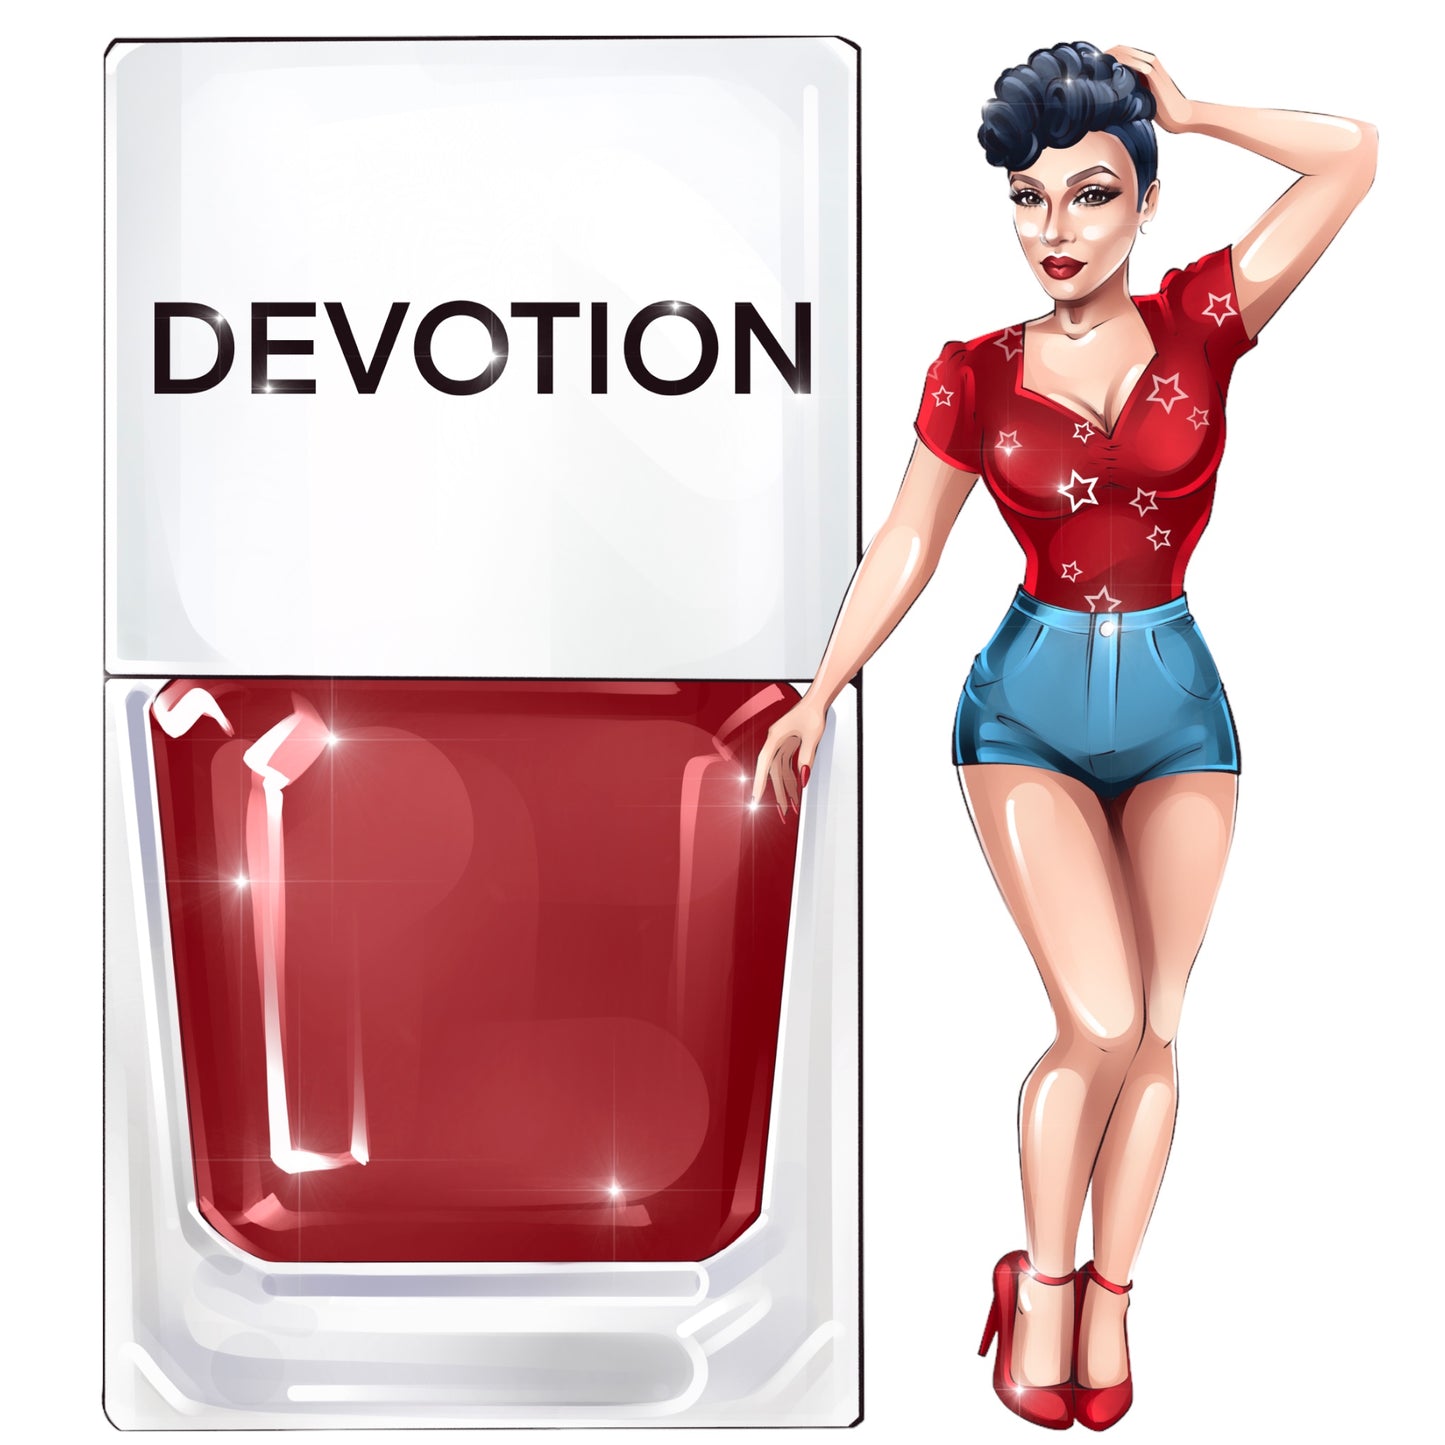 A True Nail Polish pinup for Devotion , a coral shade